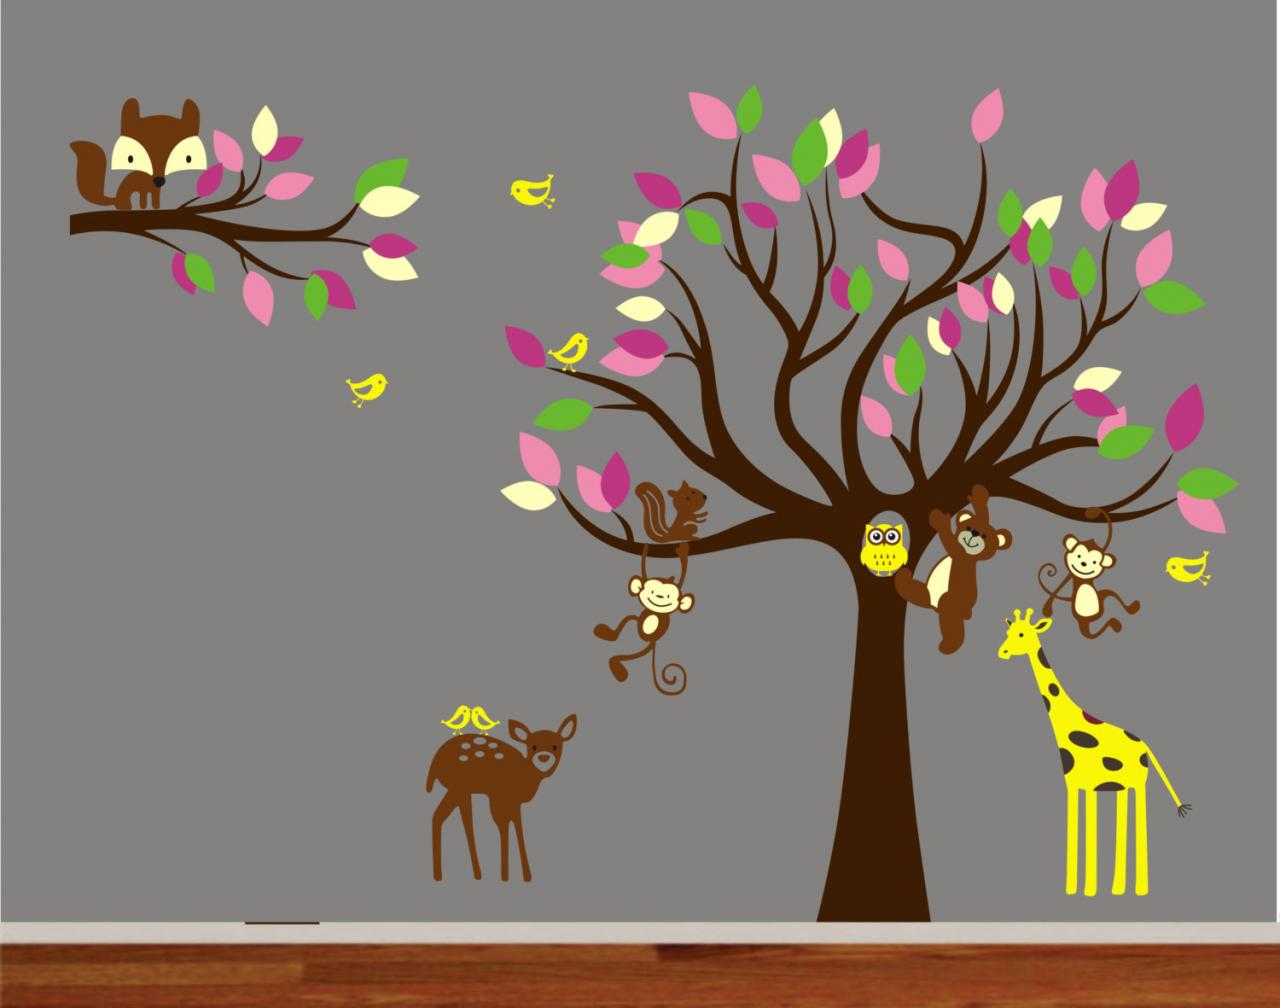 Vinyl Wall Decal Colorful Tree With Branch Forest Friends Fawn Leaf Bird Home House Wall Decals Wall Sticker Stickers Baby Room Kid R845